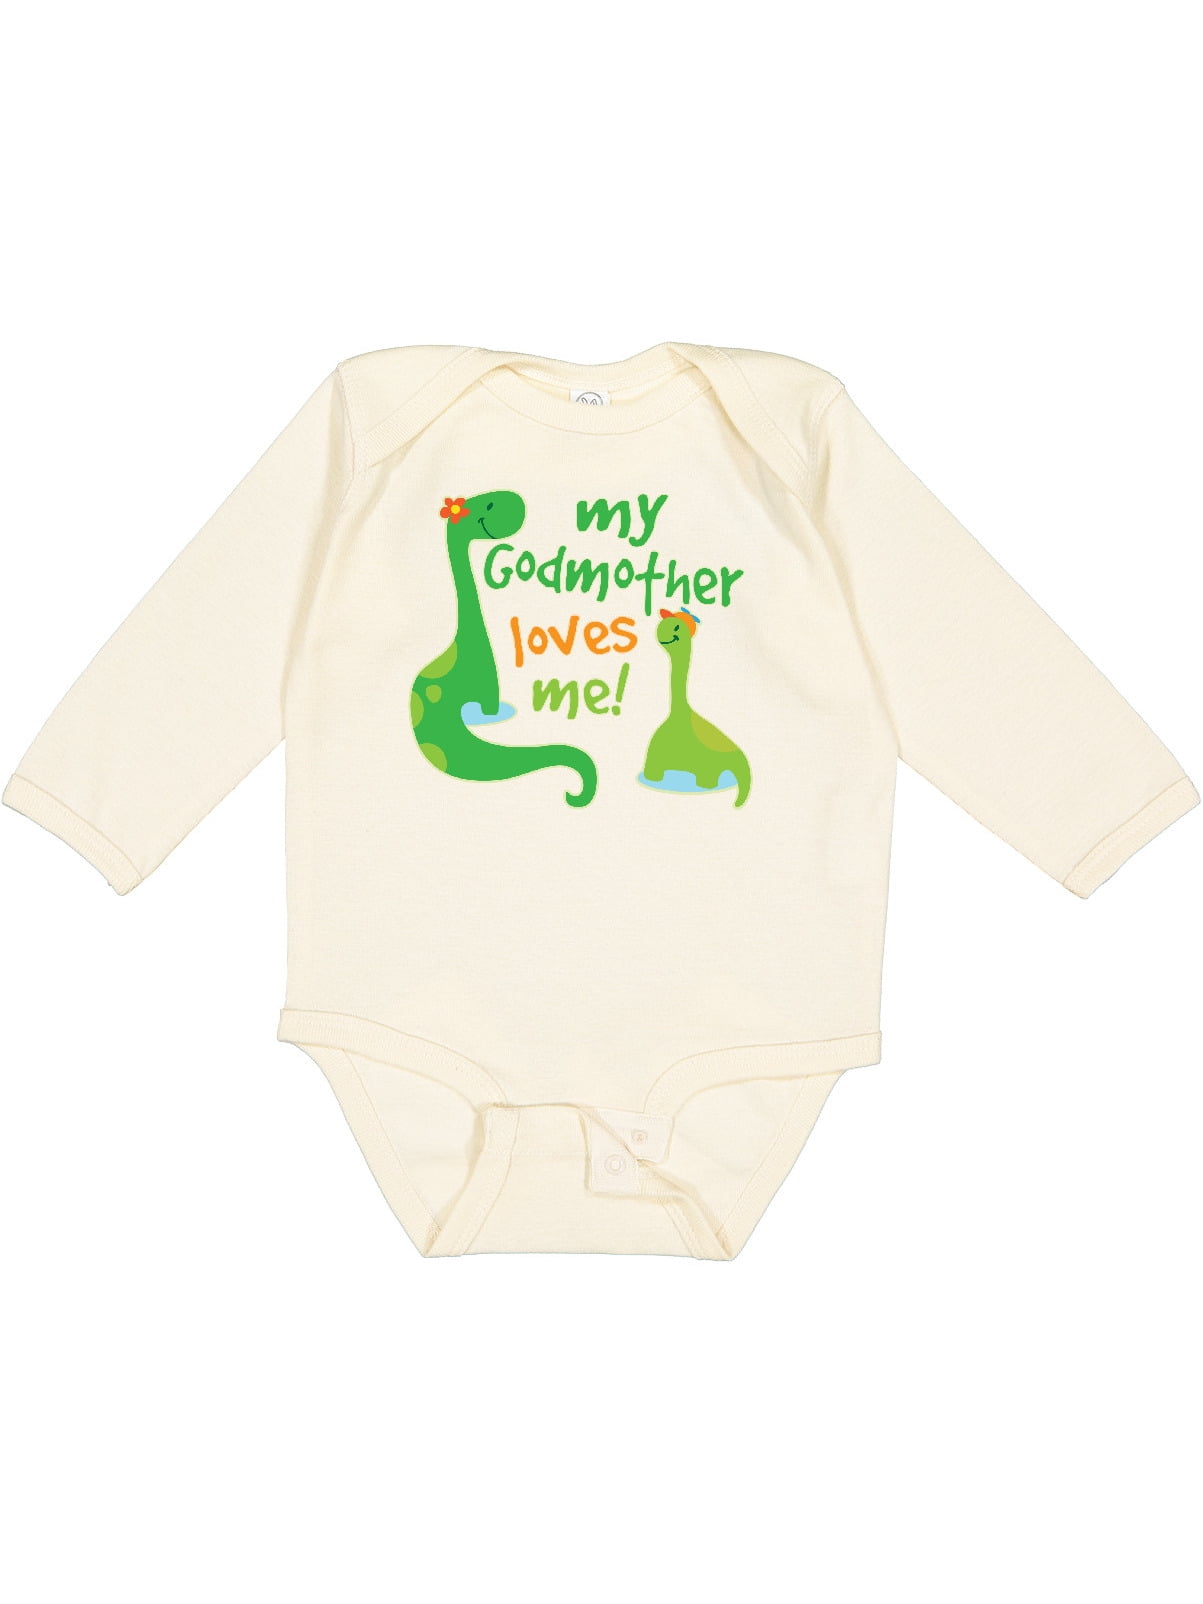 Baby Cotton Sleeper Gown Just Like My Godmother Im Going to Love Horses When I Grow Up 